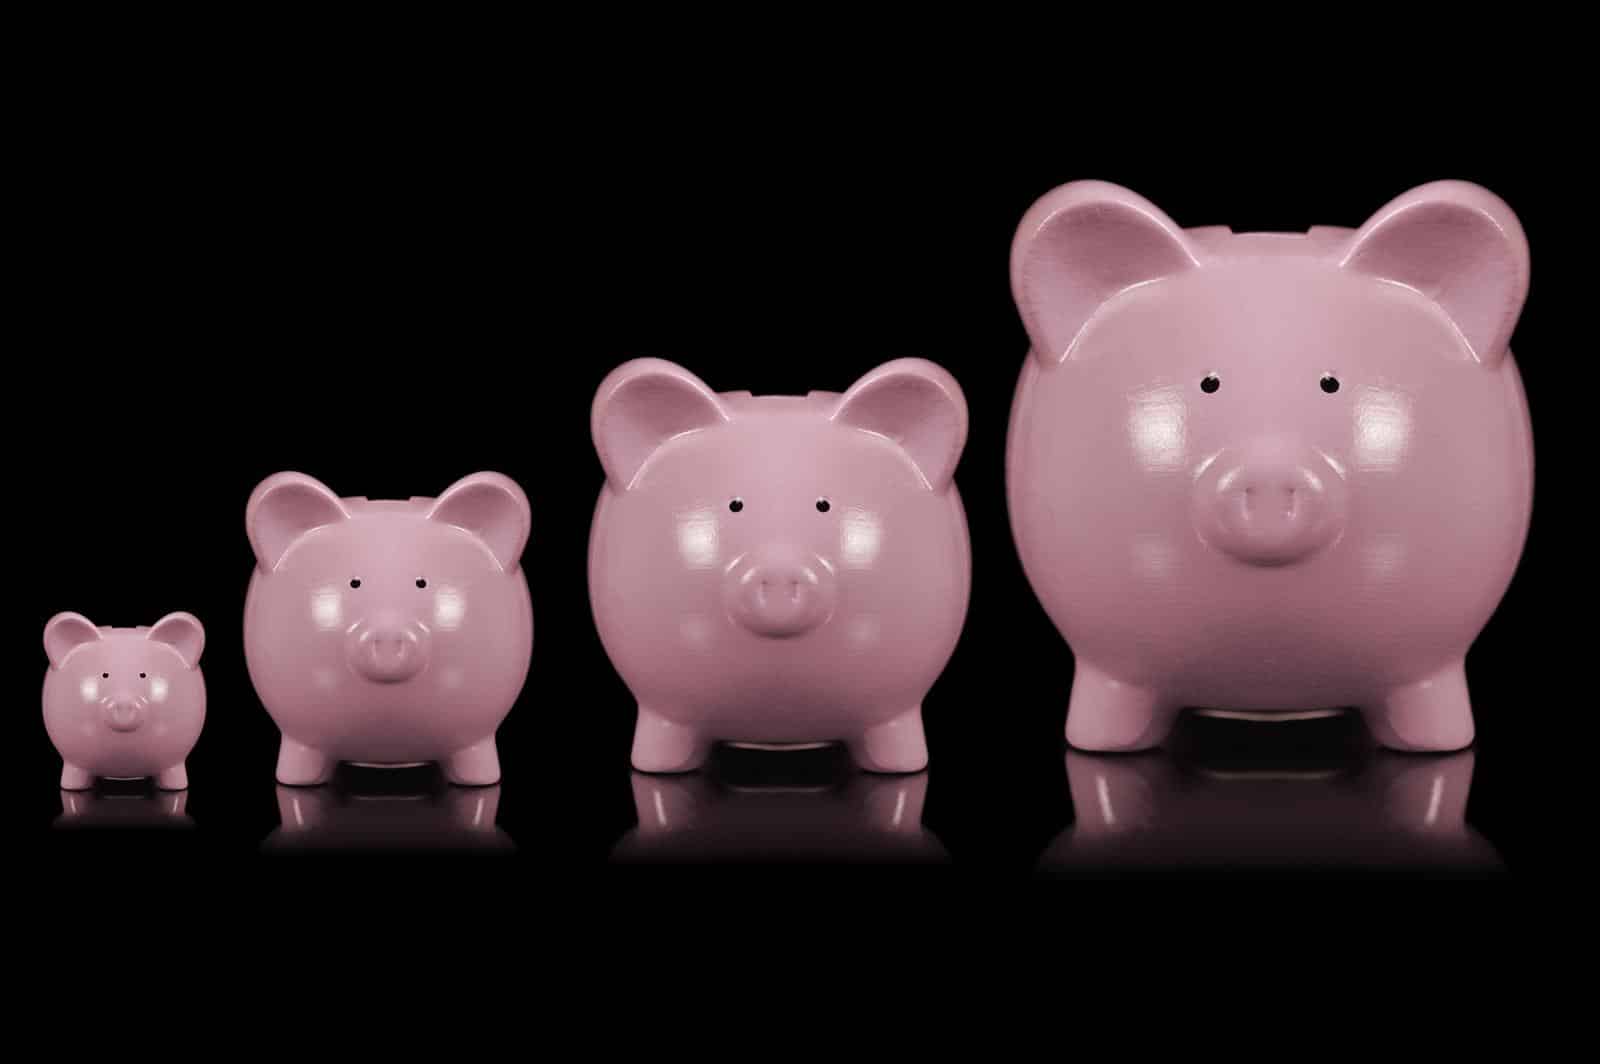 A conceptual image of growing your savings illustrated by piggy banks getting larger over time.